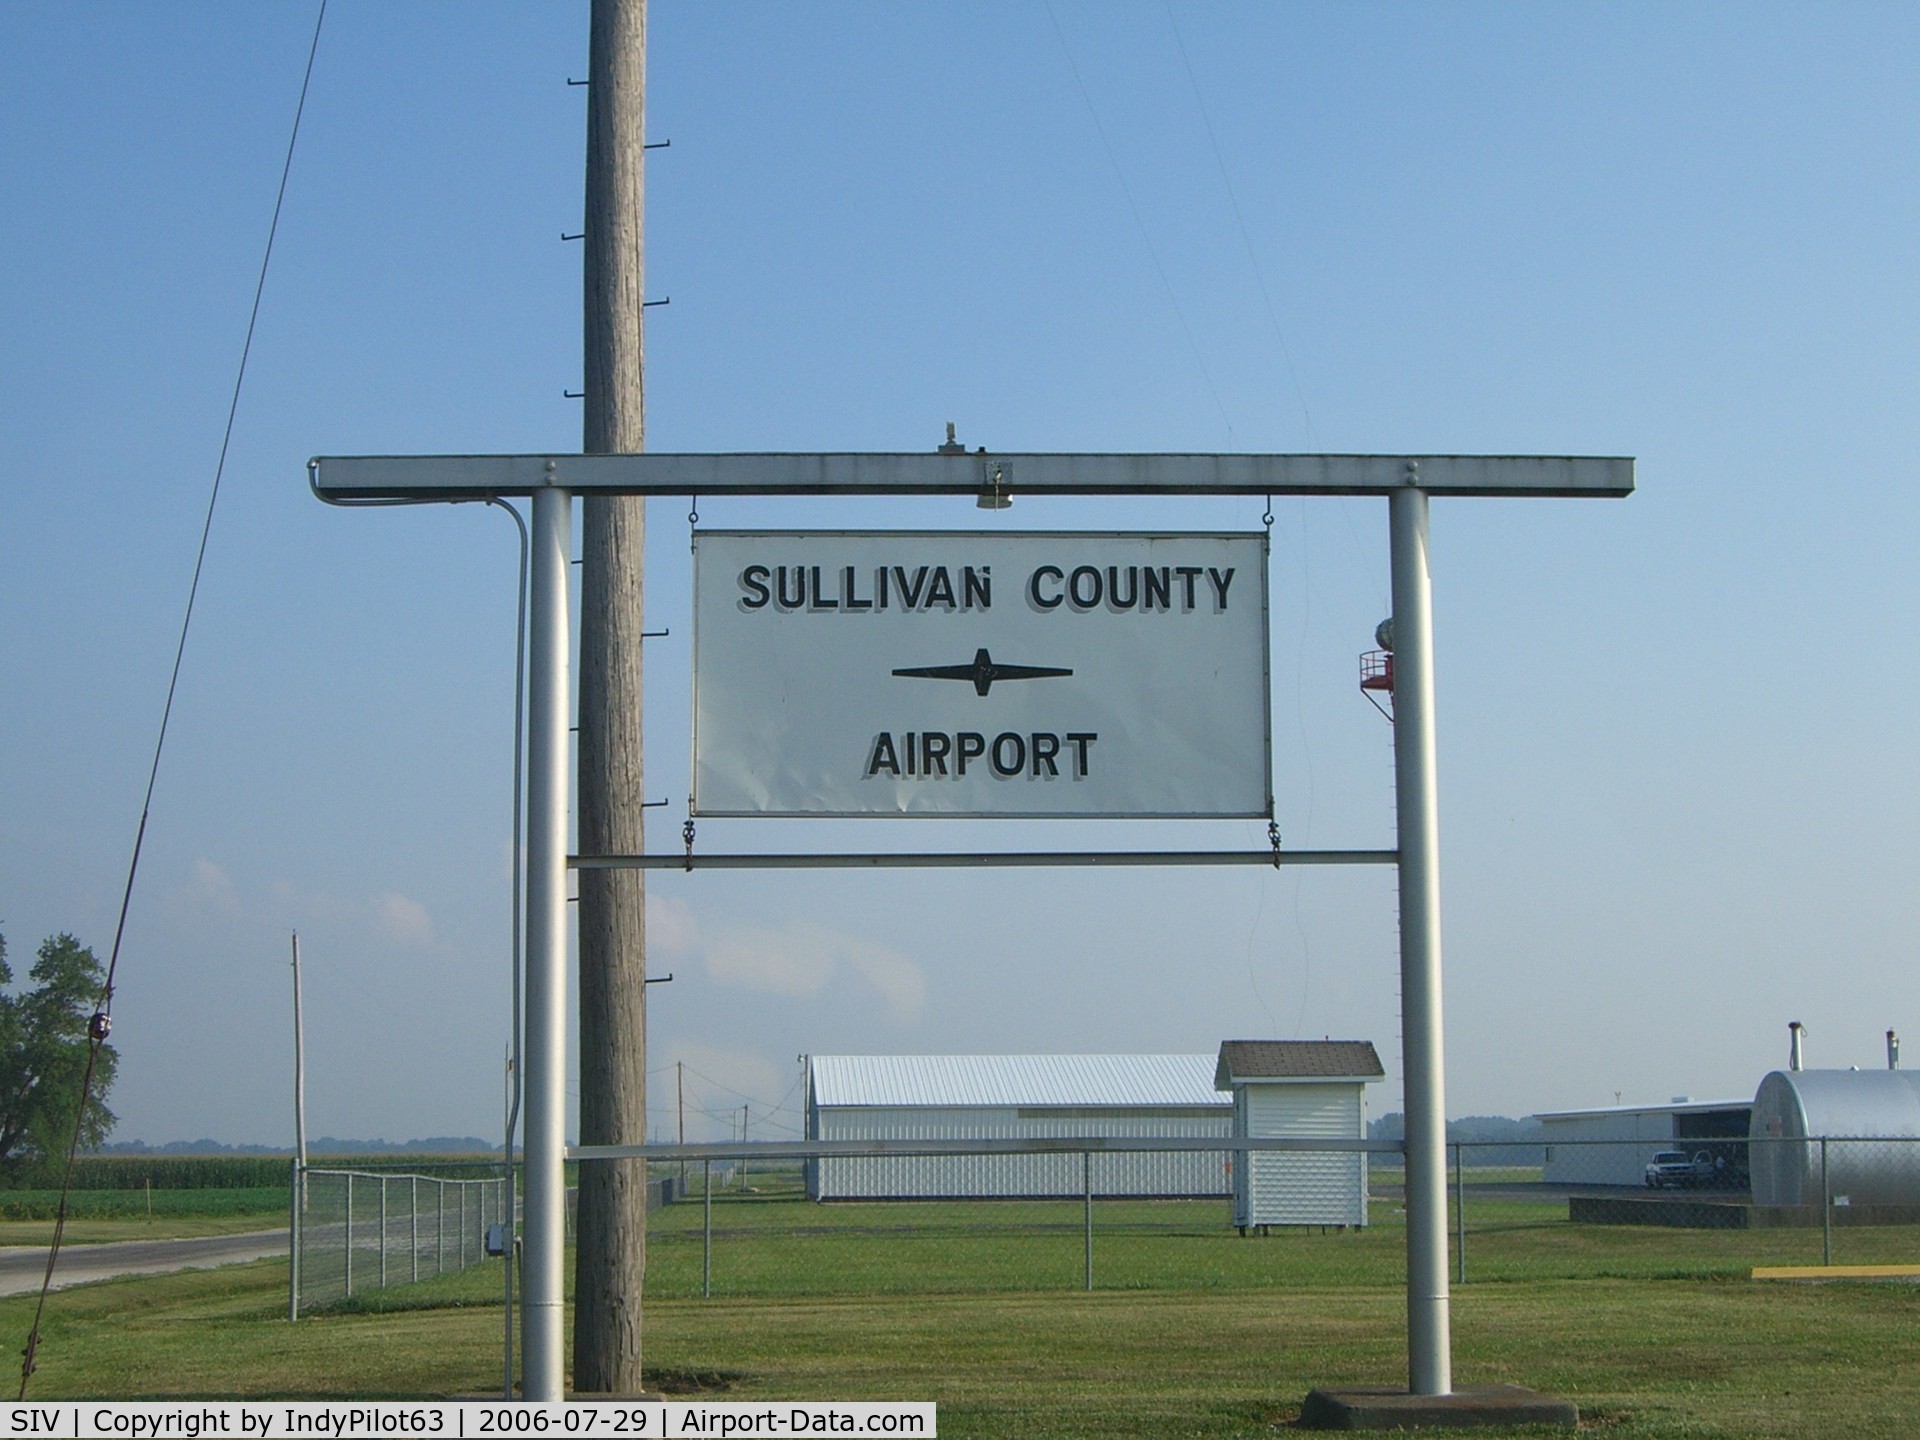 Sullivan County Airport (SIV) - Airport Sign